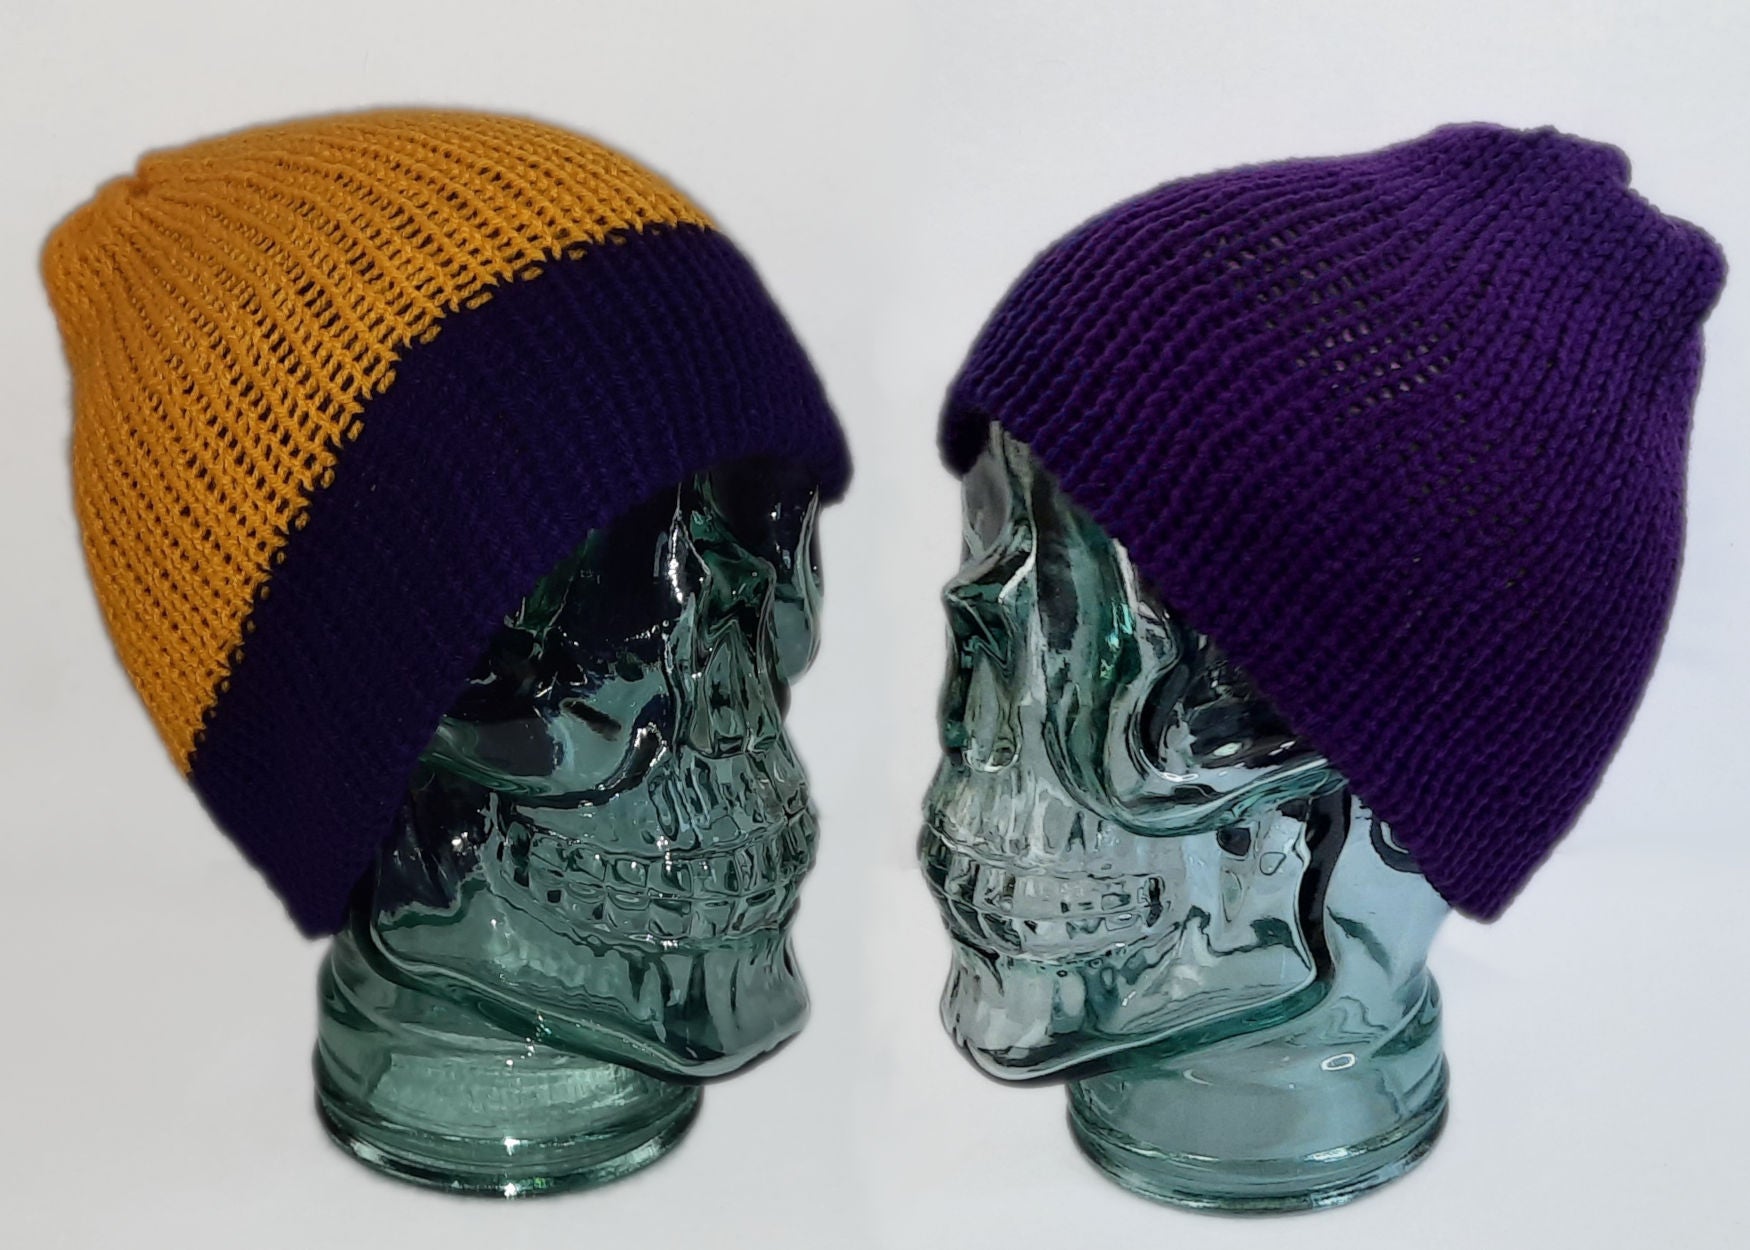 Intersex Flag Inspired Reversible Hat - Tully Crafts